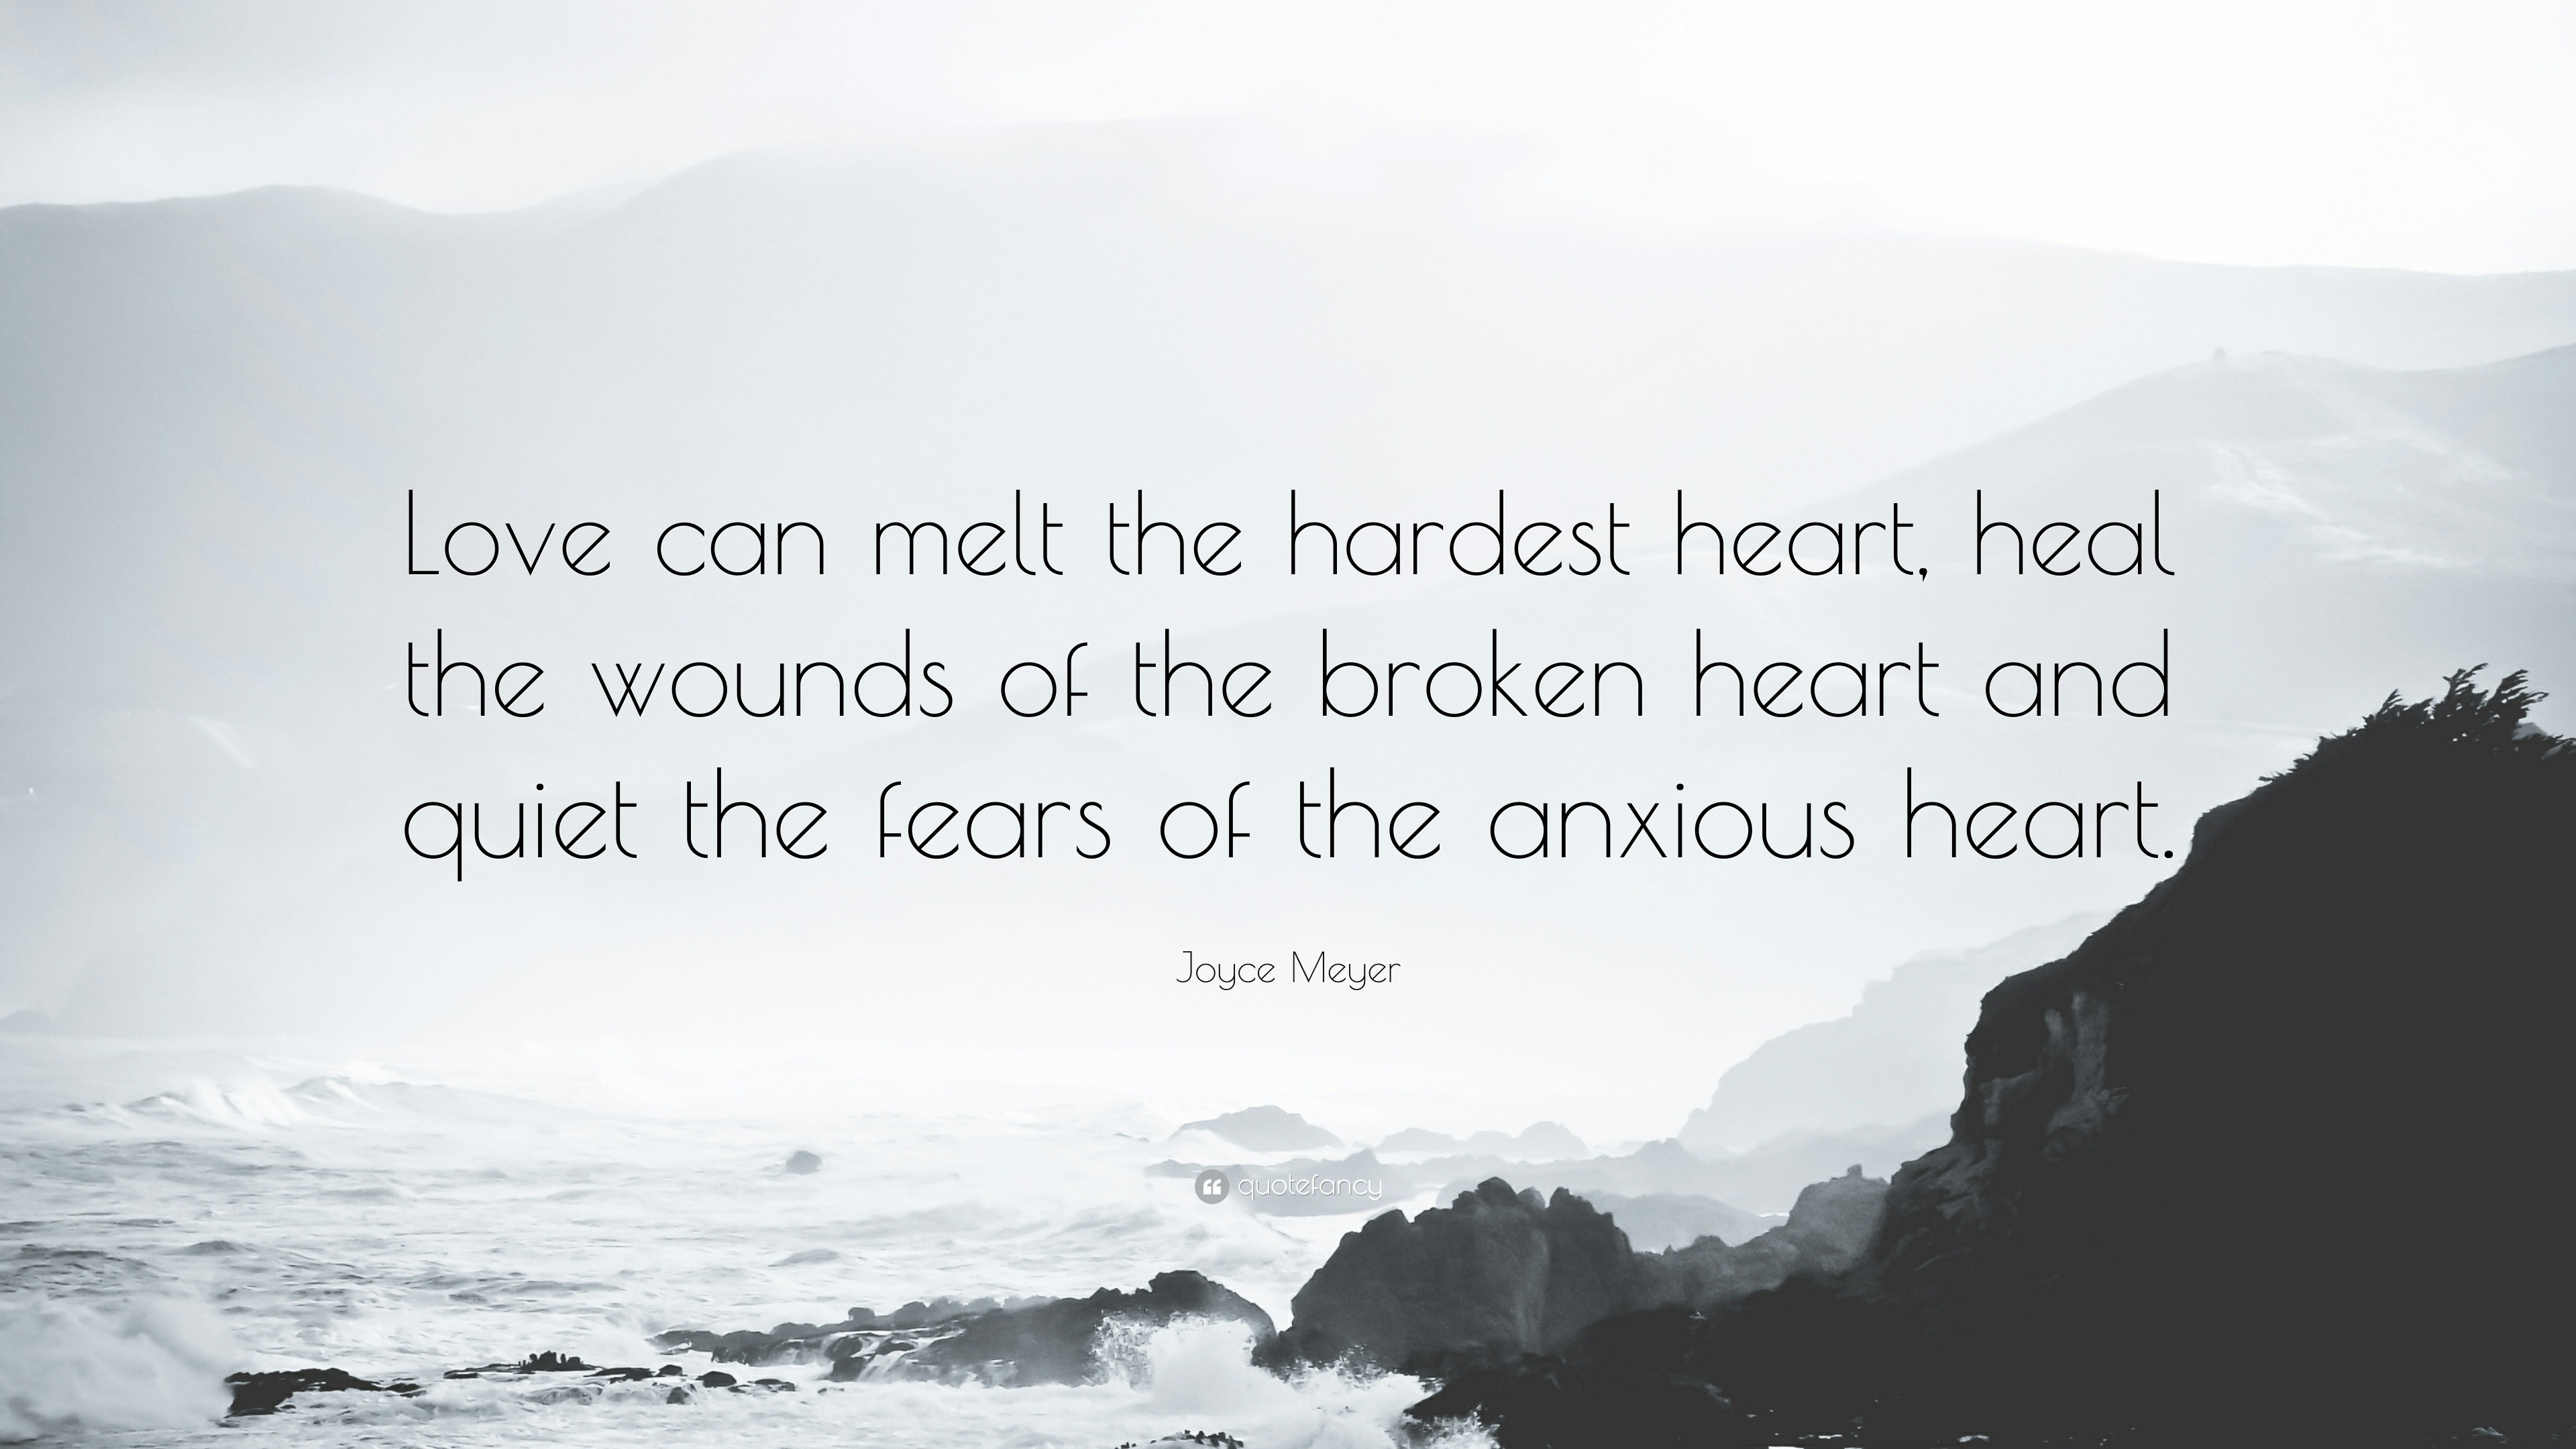 Joyce Meyer Quote “Love can melt the hardest heart heal the wounds of